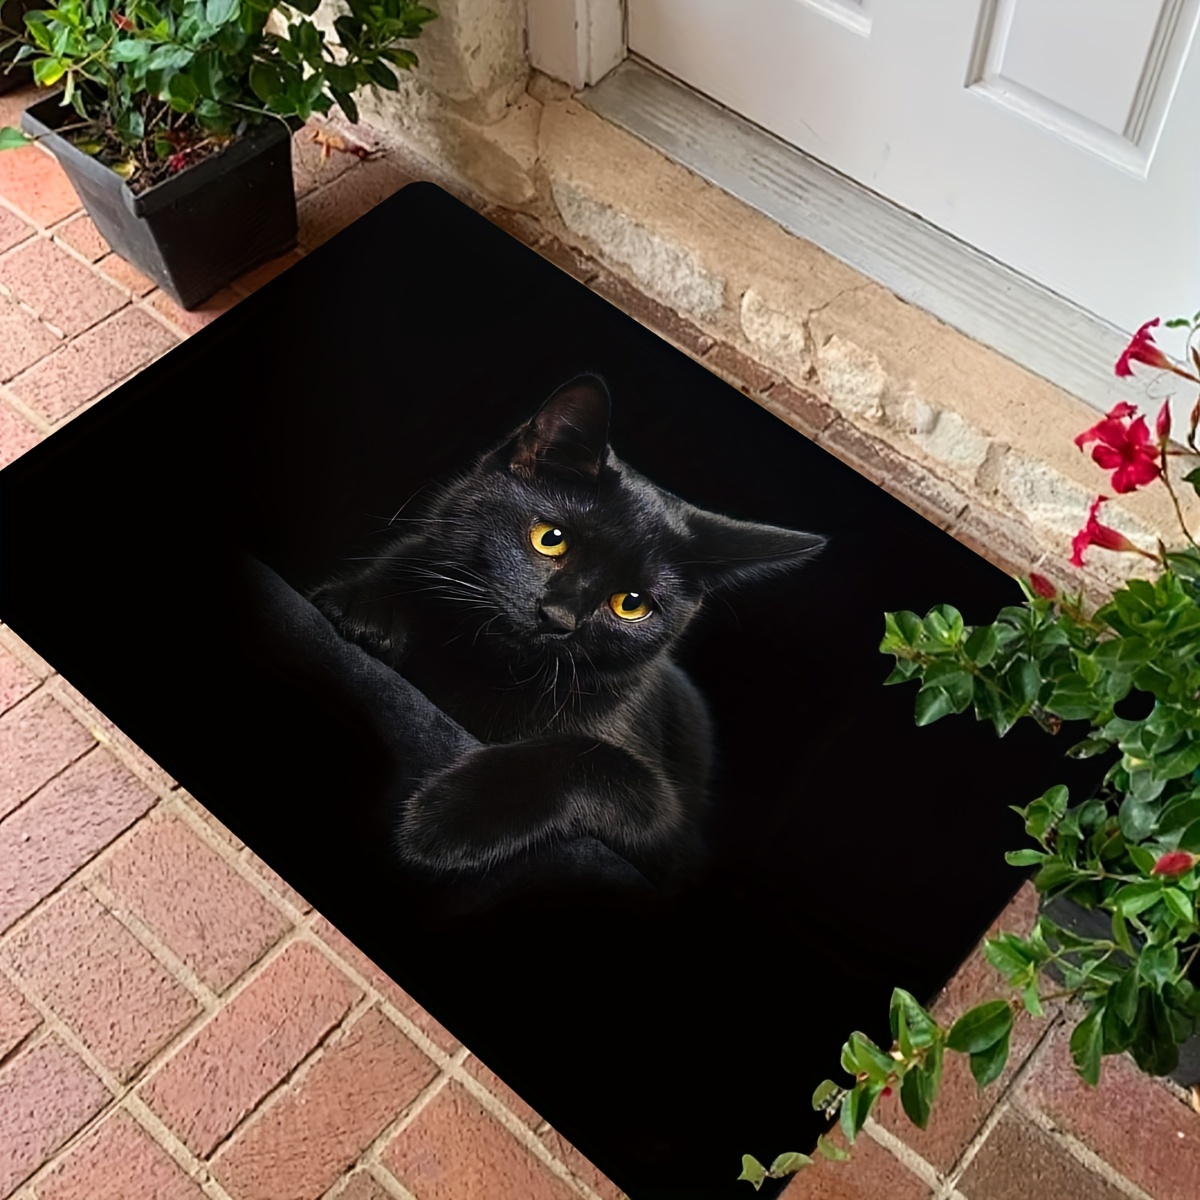 

1pc, Black Cat Print Door Mat,anti Slip And Anti Fouling Polyester Rug, Indoor And Outdoor Available, Home Decor, Room Decor